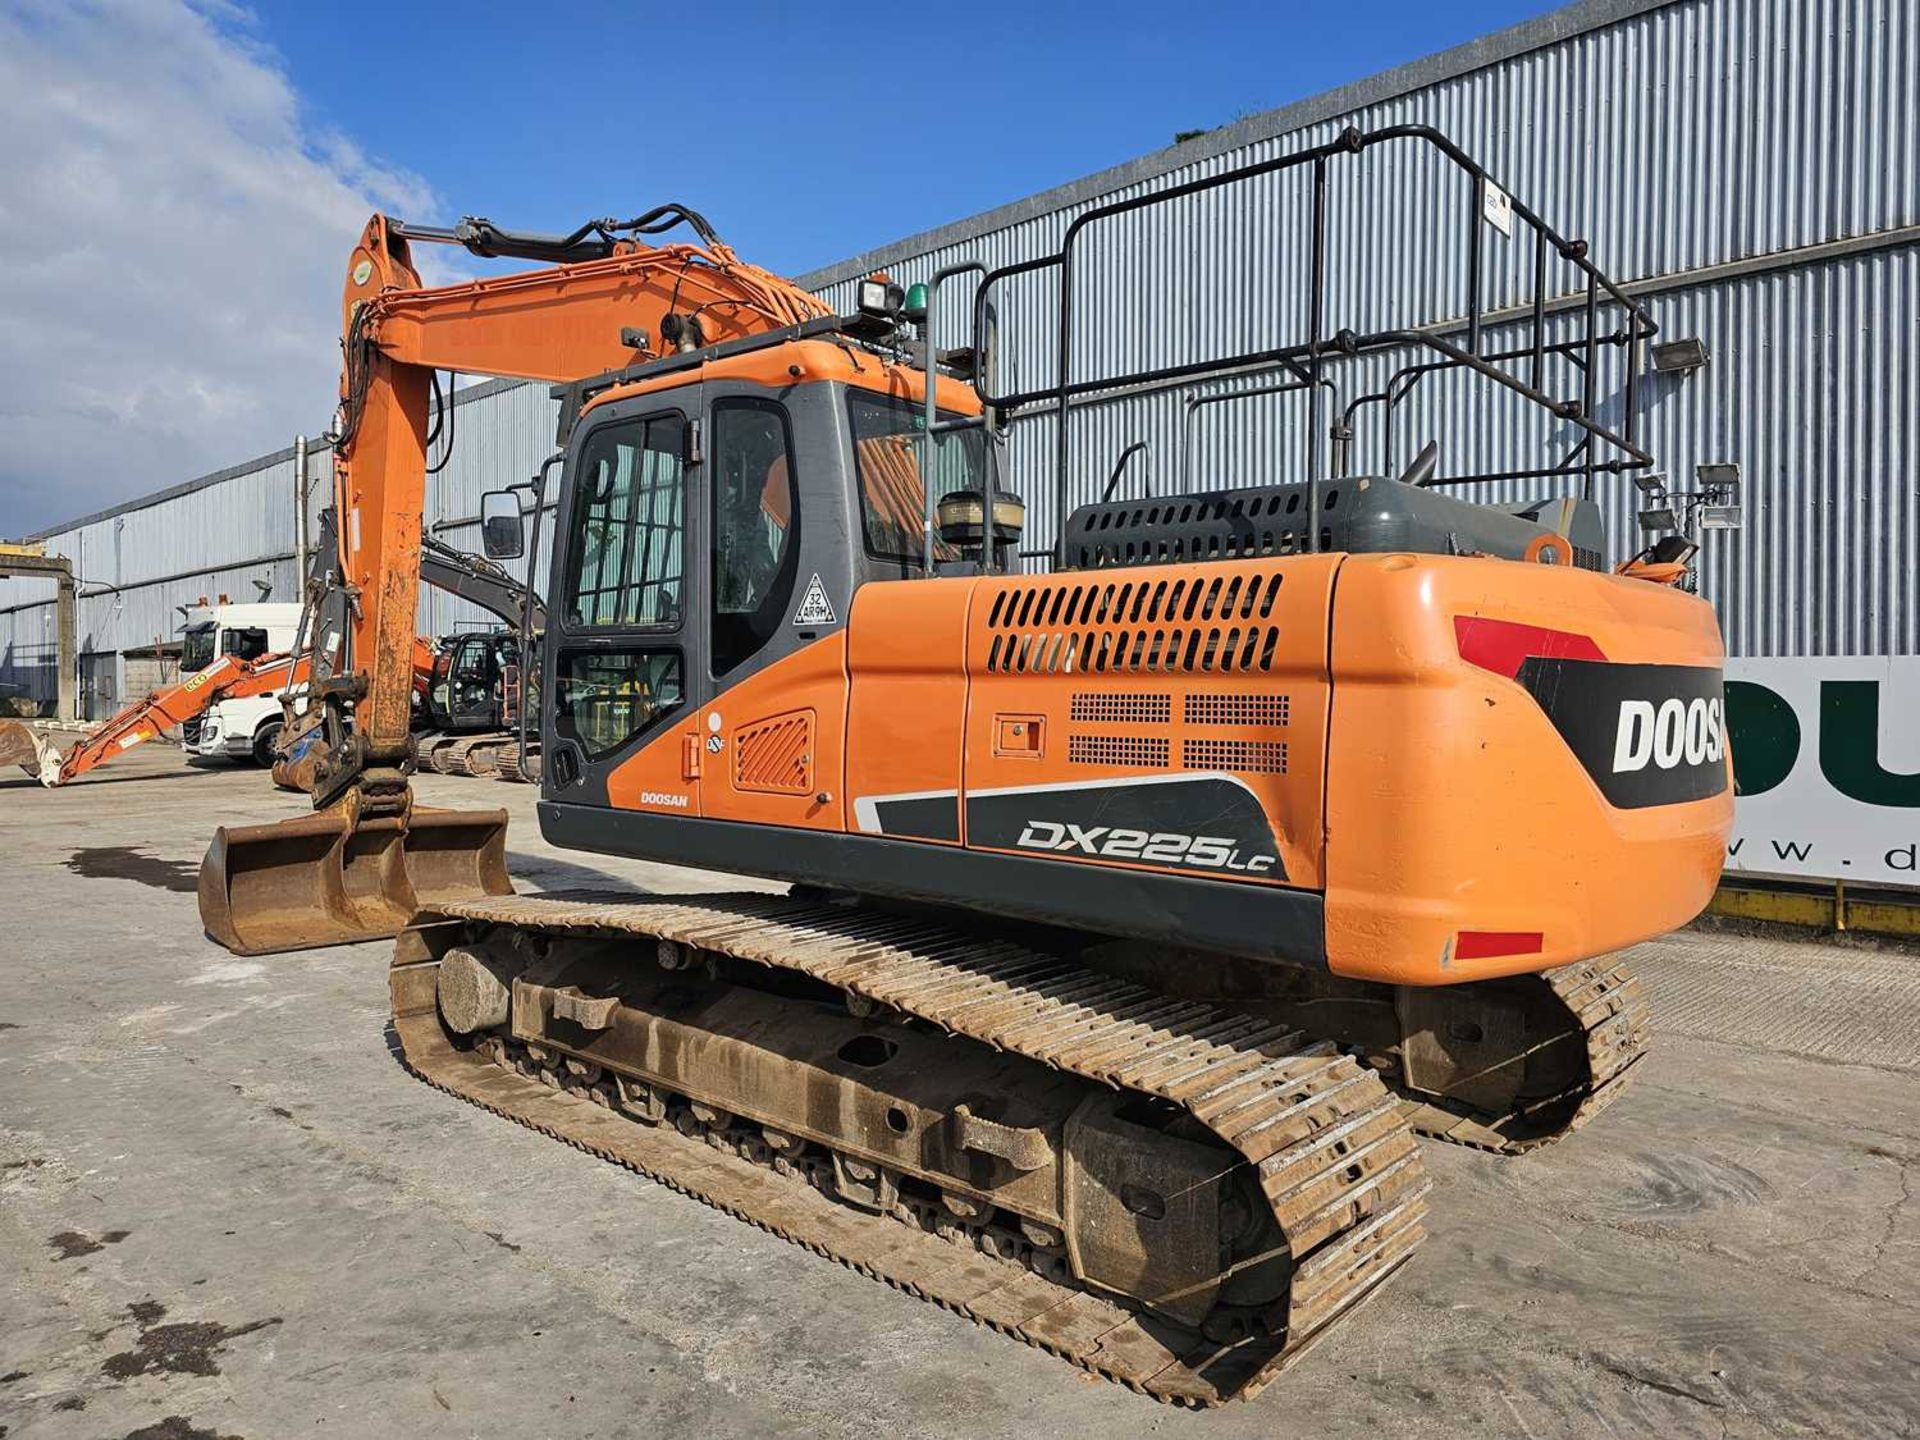 2018 Doosan DX225LC-5 800mm Pads, CV, Geith Hydraulic QH, Piped, Aux. Piping, Demo Cage, Reverse Cam - Image 3 of 34